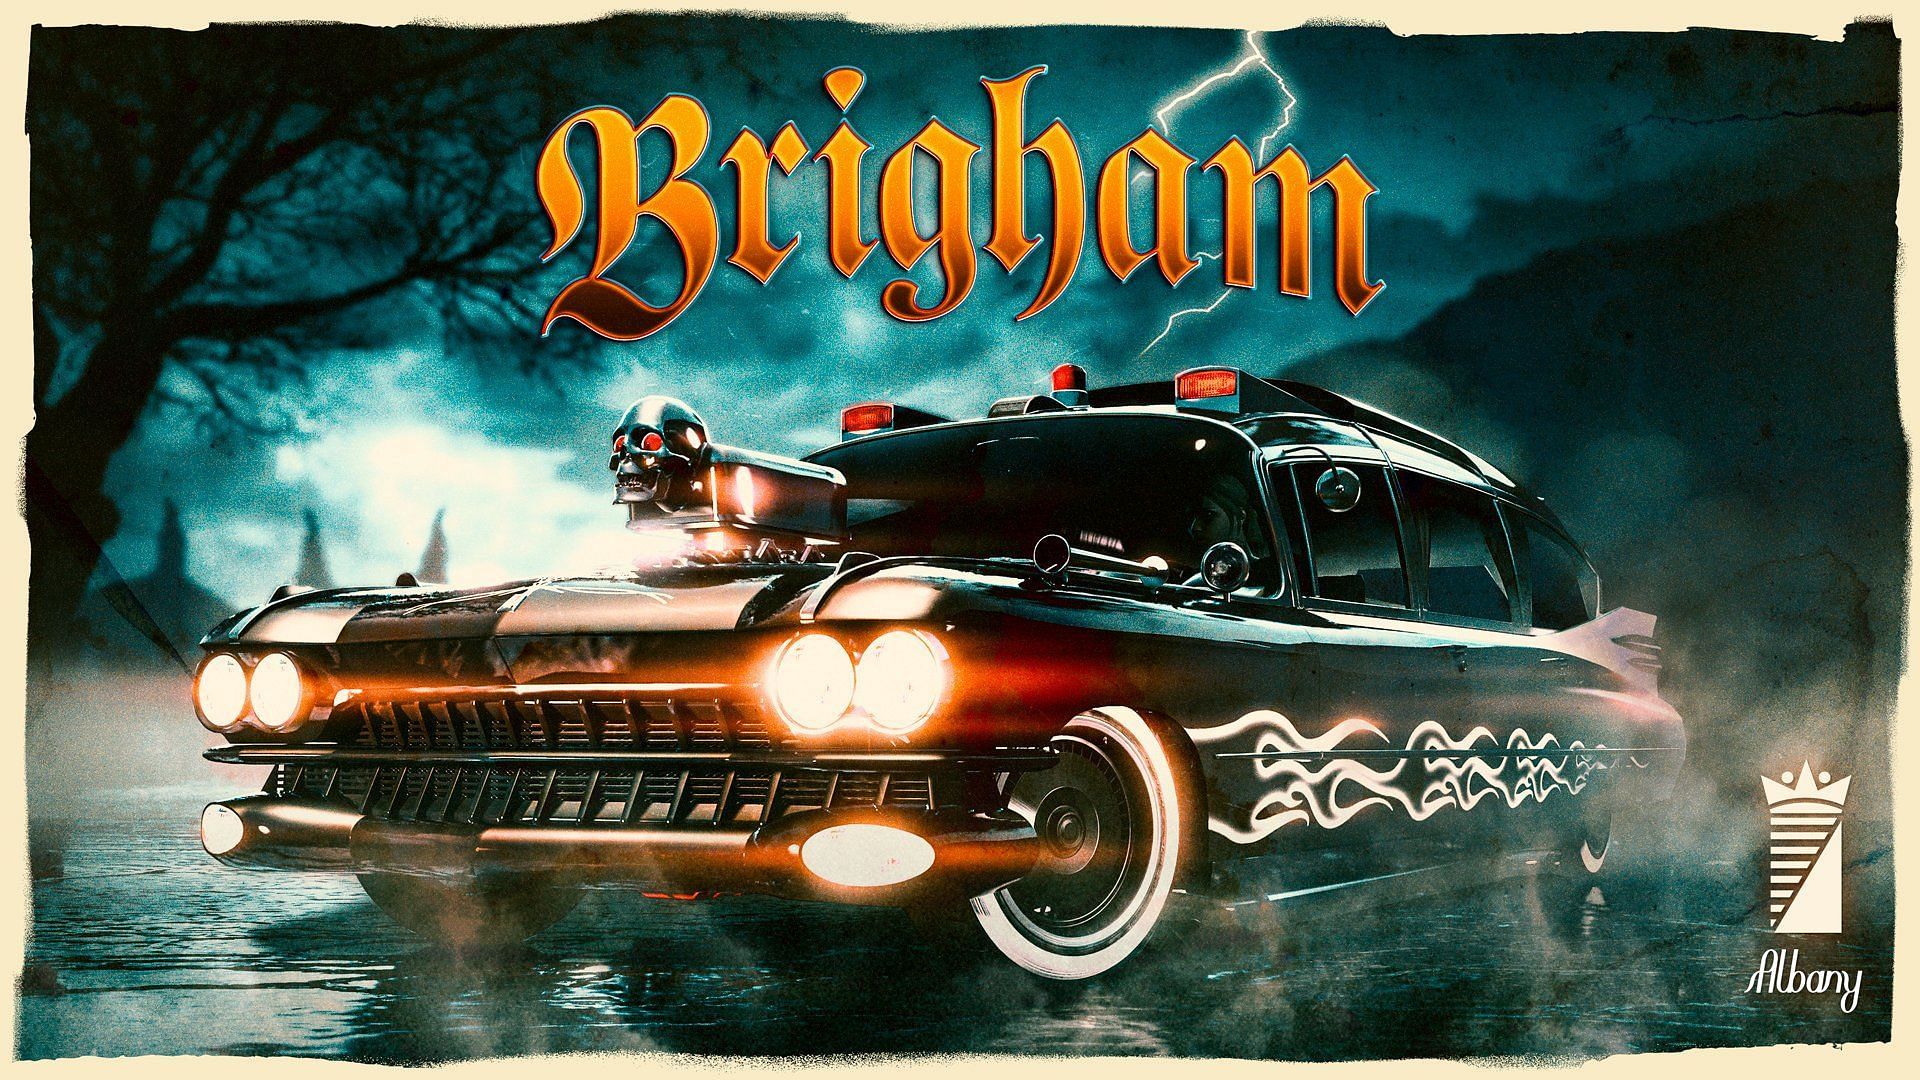 The Albany Brigham has just debuted (Image via Rockstar Games)